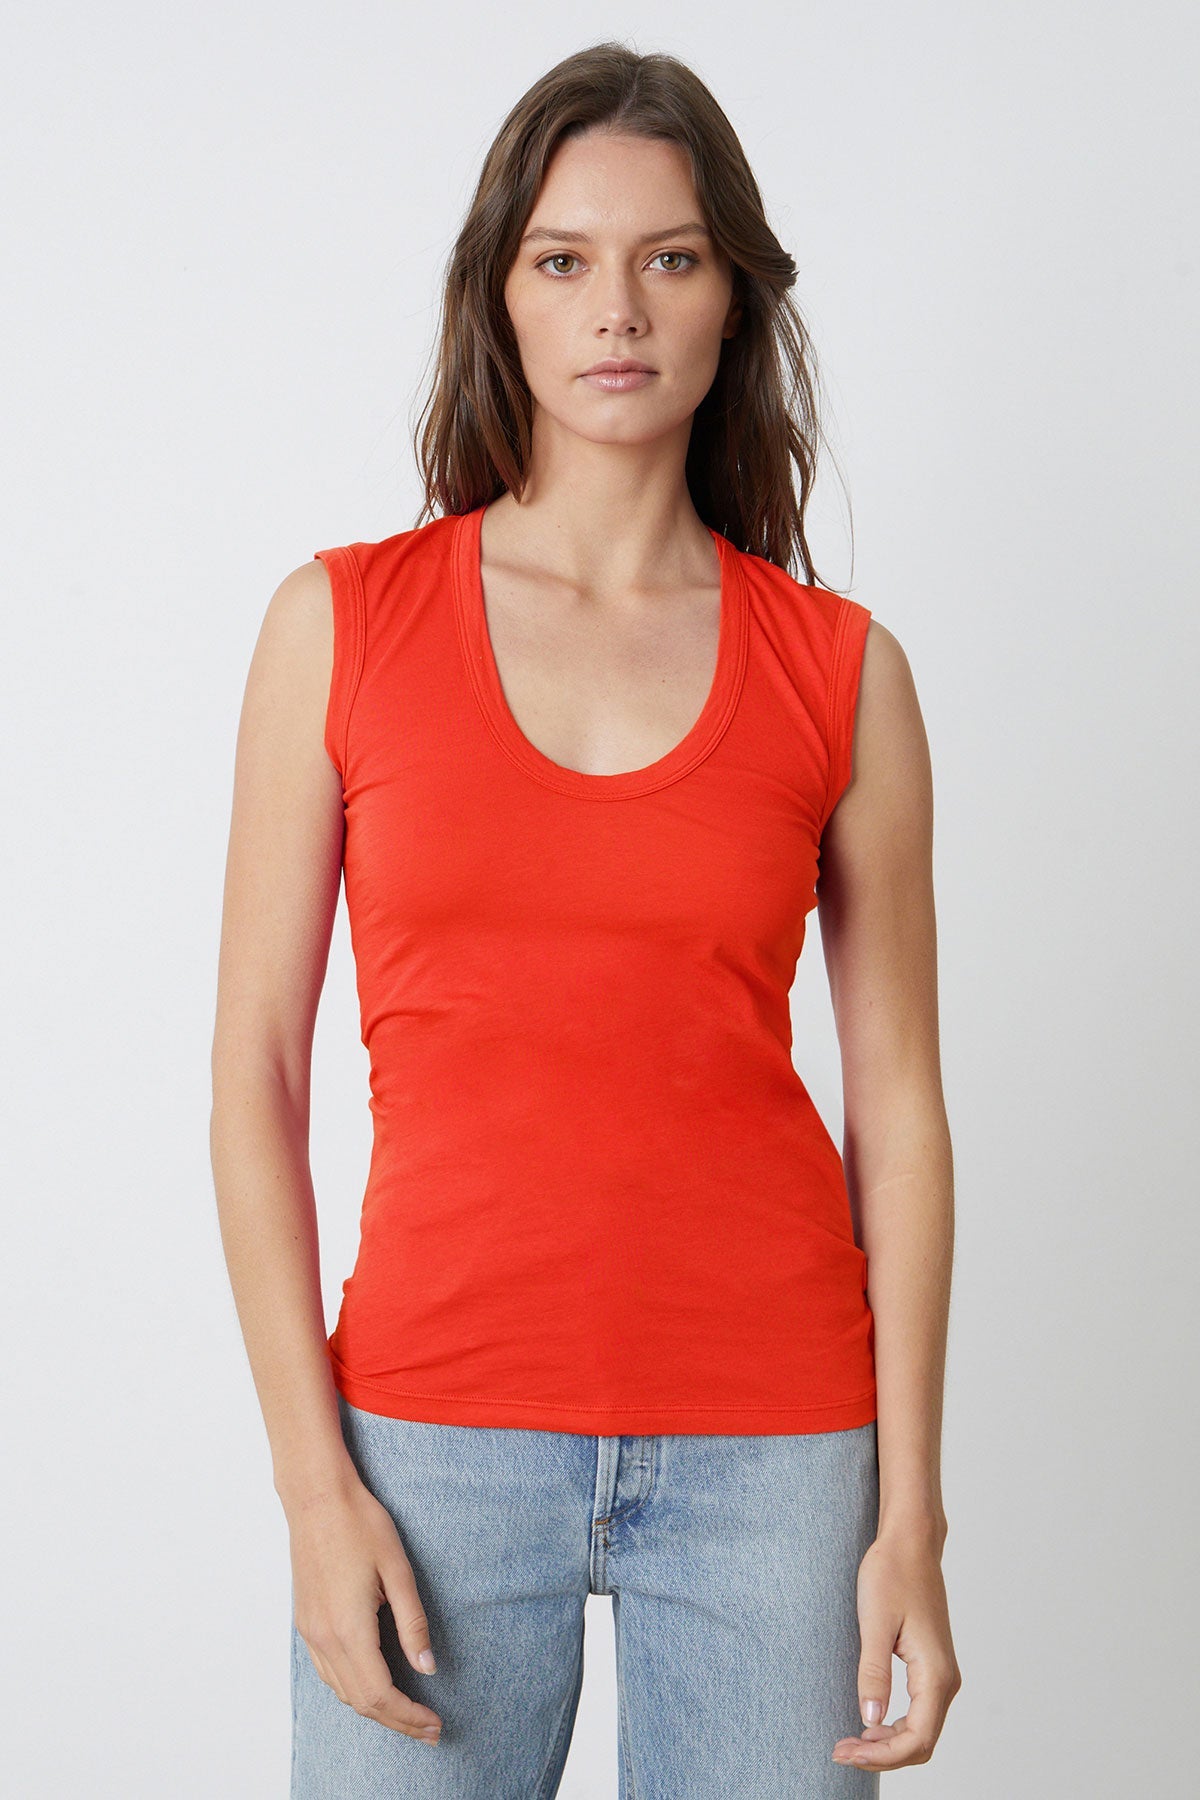 Estina Fitted Tank Top in bright cardinal red gauzy whisper with light blue denim front-26715129741505